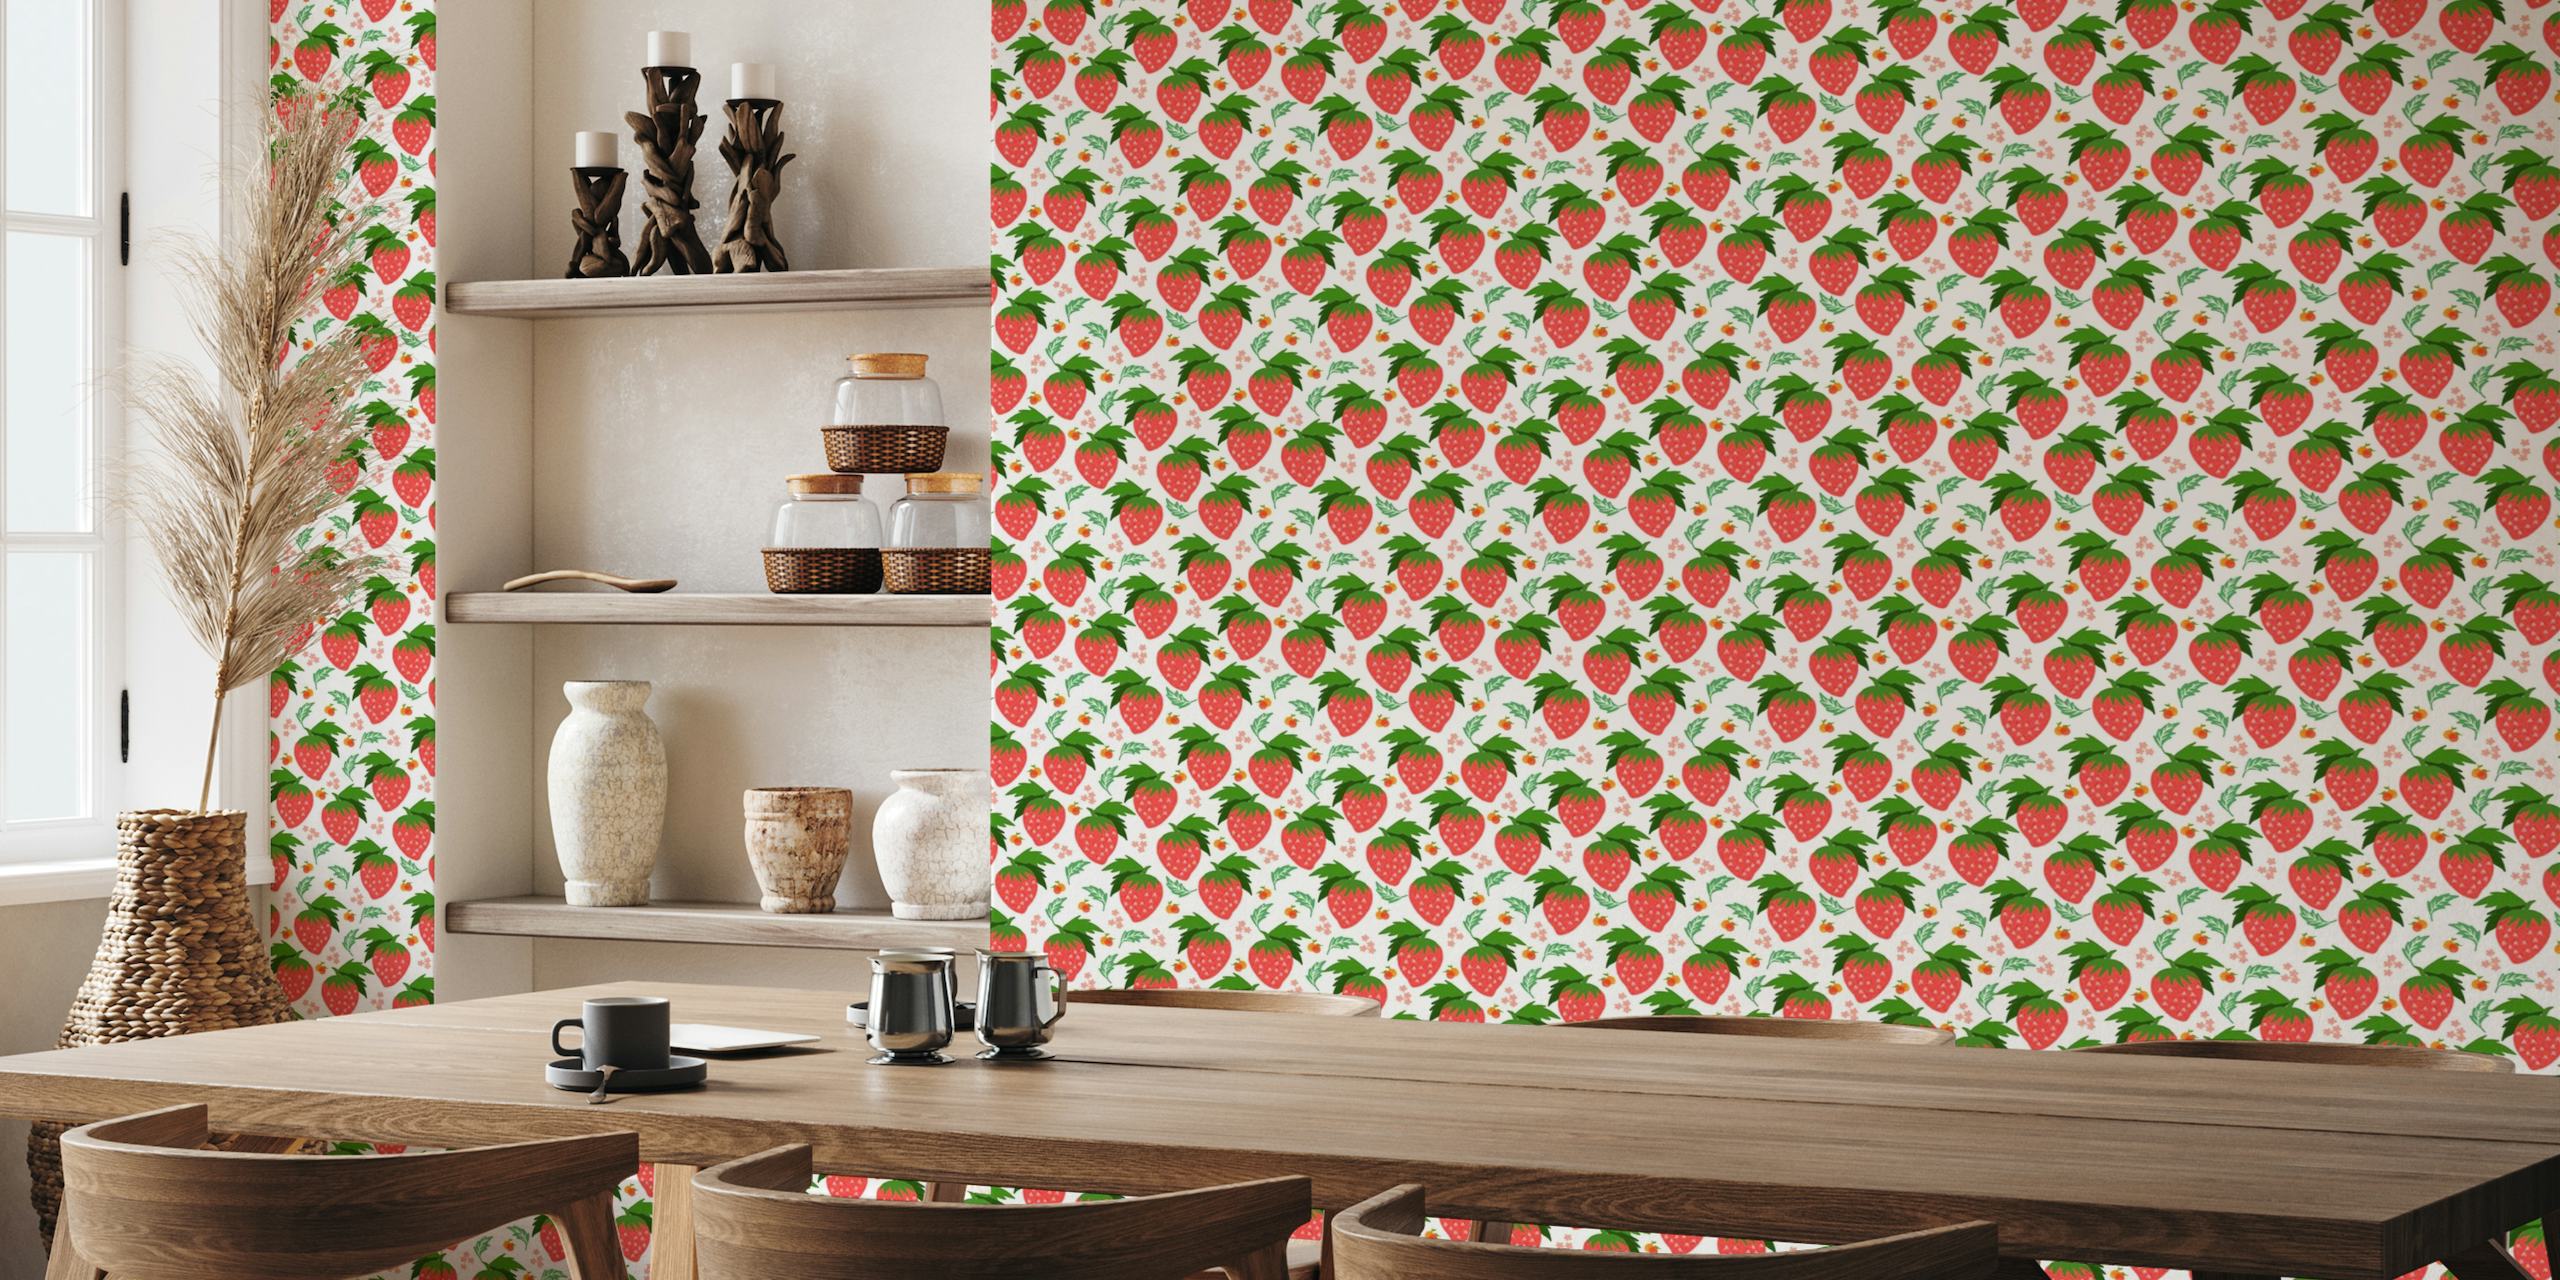 Strawberries fruit tropical pattern on a white background behang